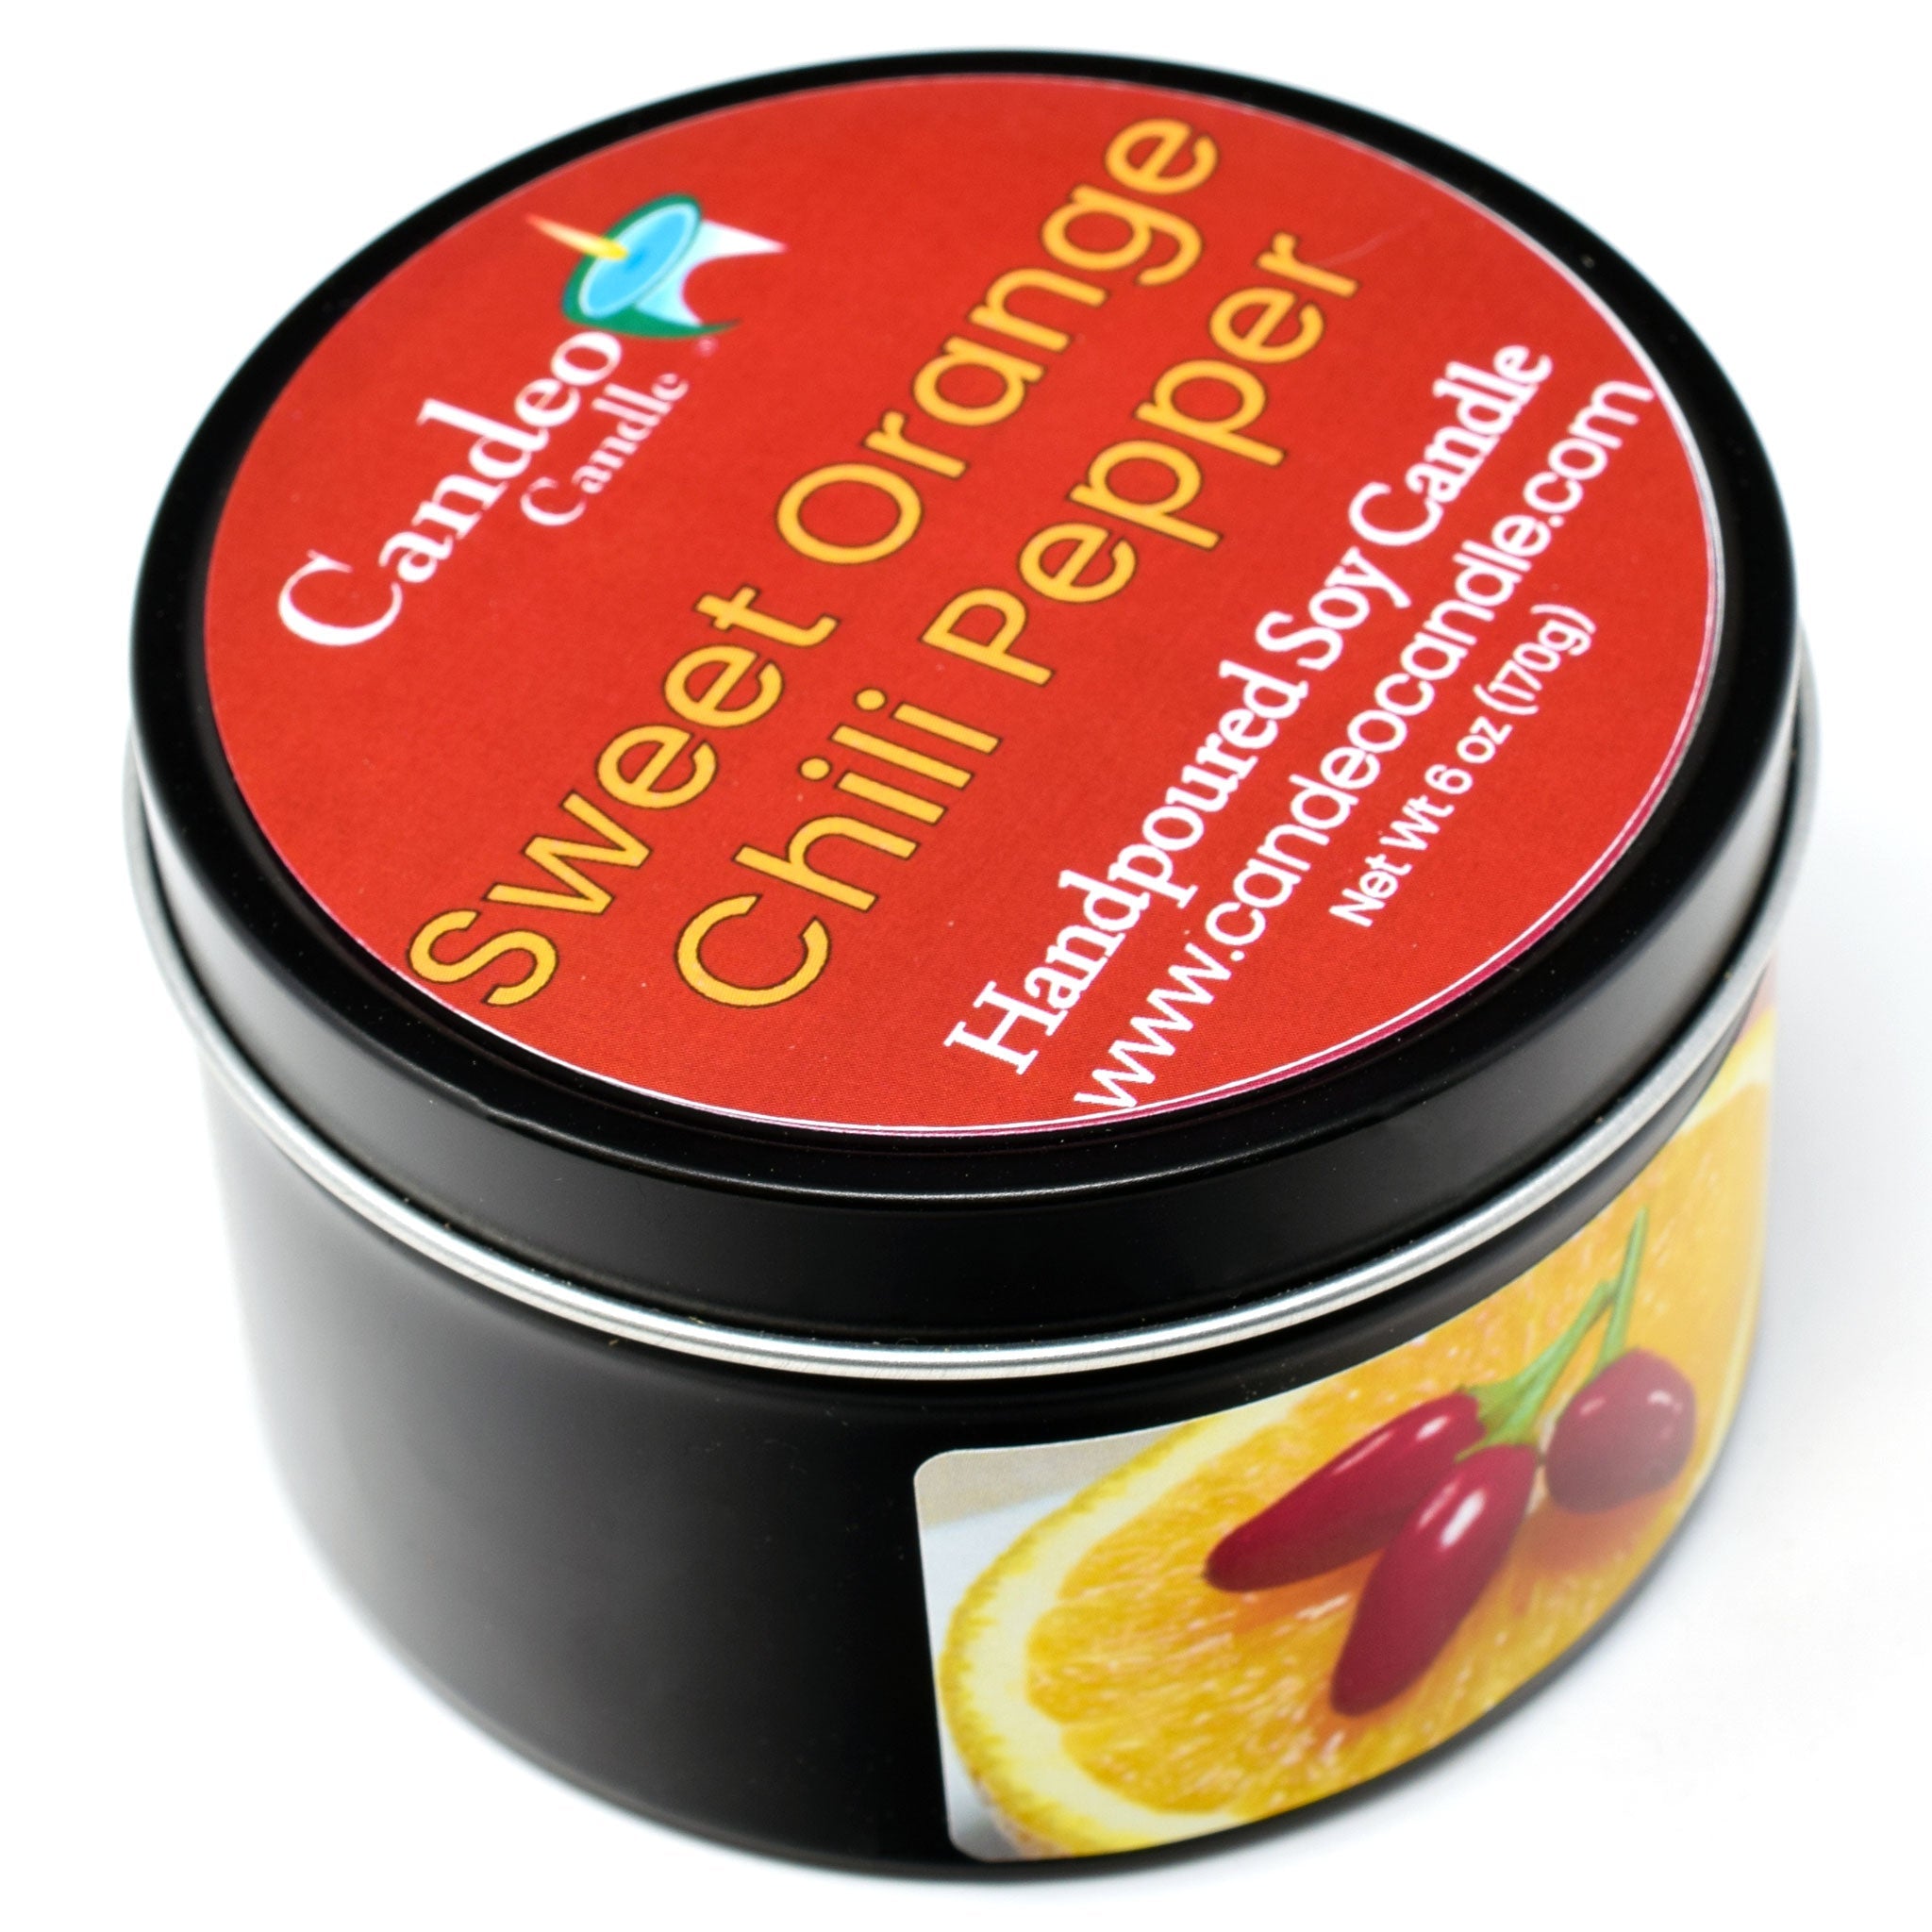 Sweet Orange Chili Pepper, 6oz Soy Candle Tin - Candeo Candle